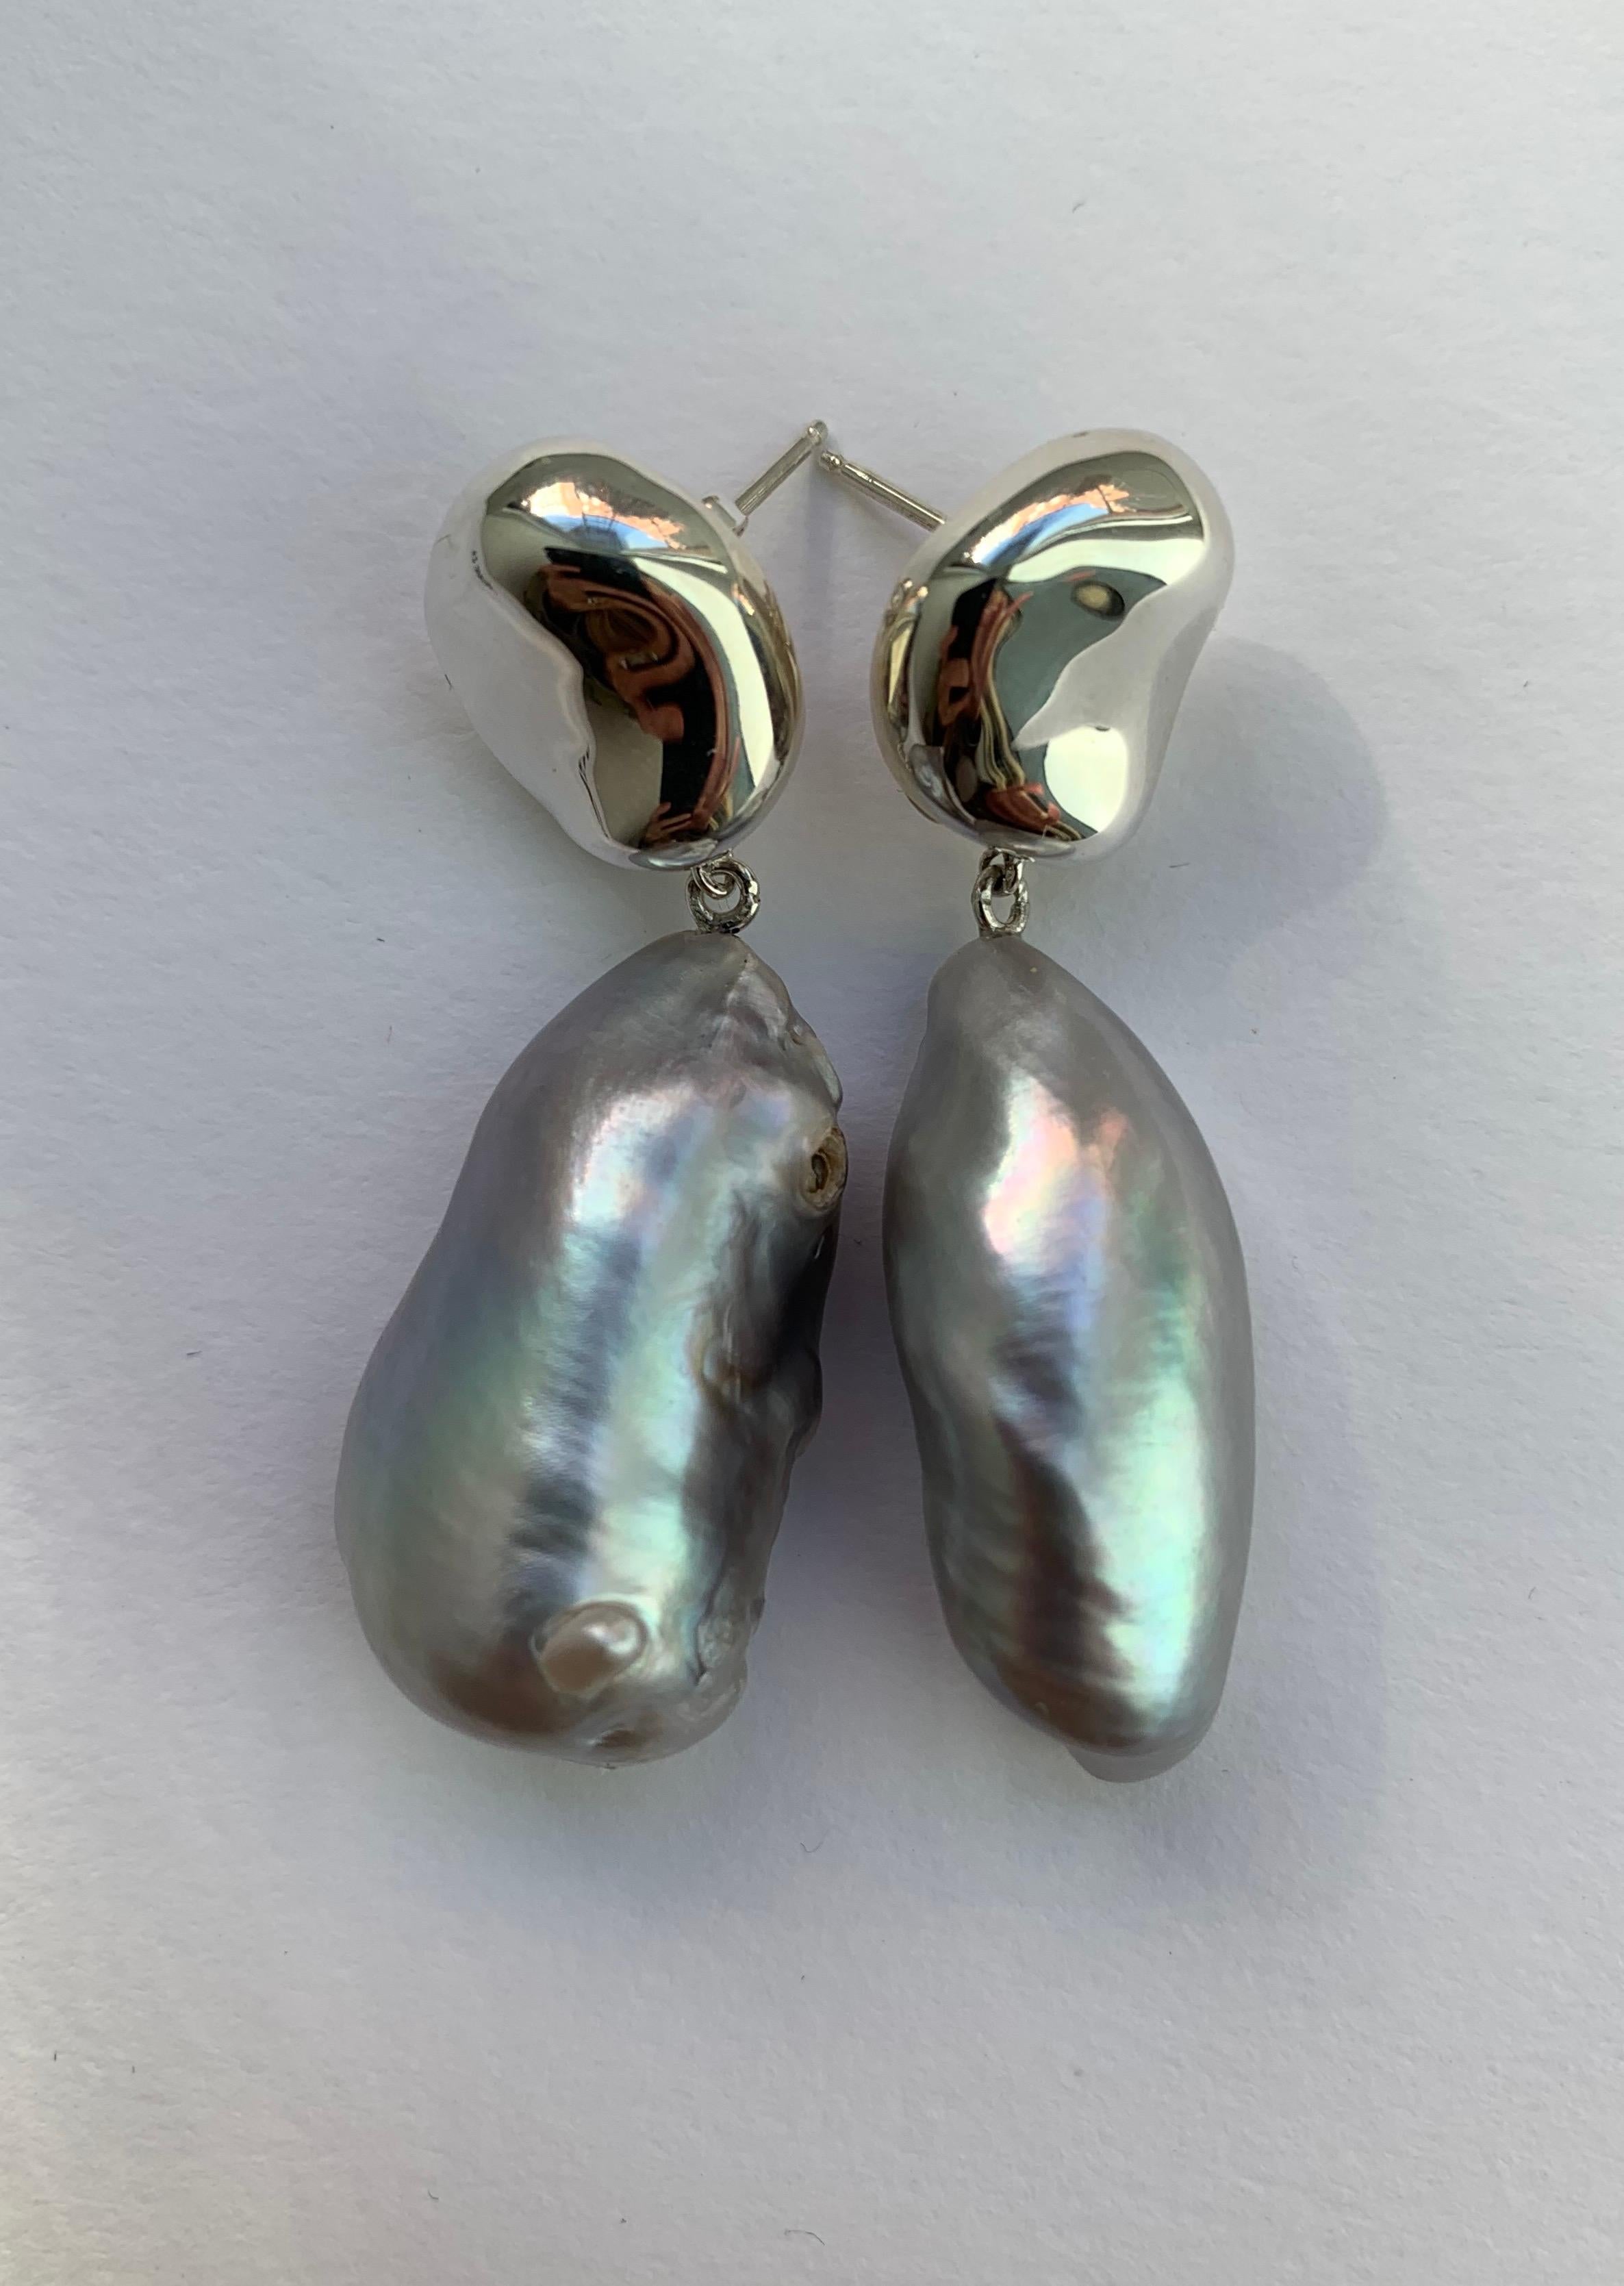 AGMES Sterling Silver Baroque Freshwater Dark Pearl Organic Shape Drop Earrings.
Sterling Silver Posts.
All pearls are one of a kind and may differ slightly from these photos.  Also available with white pearls or gold vermeil top.  Please see